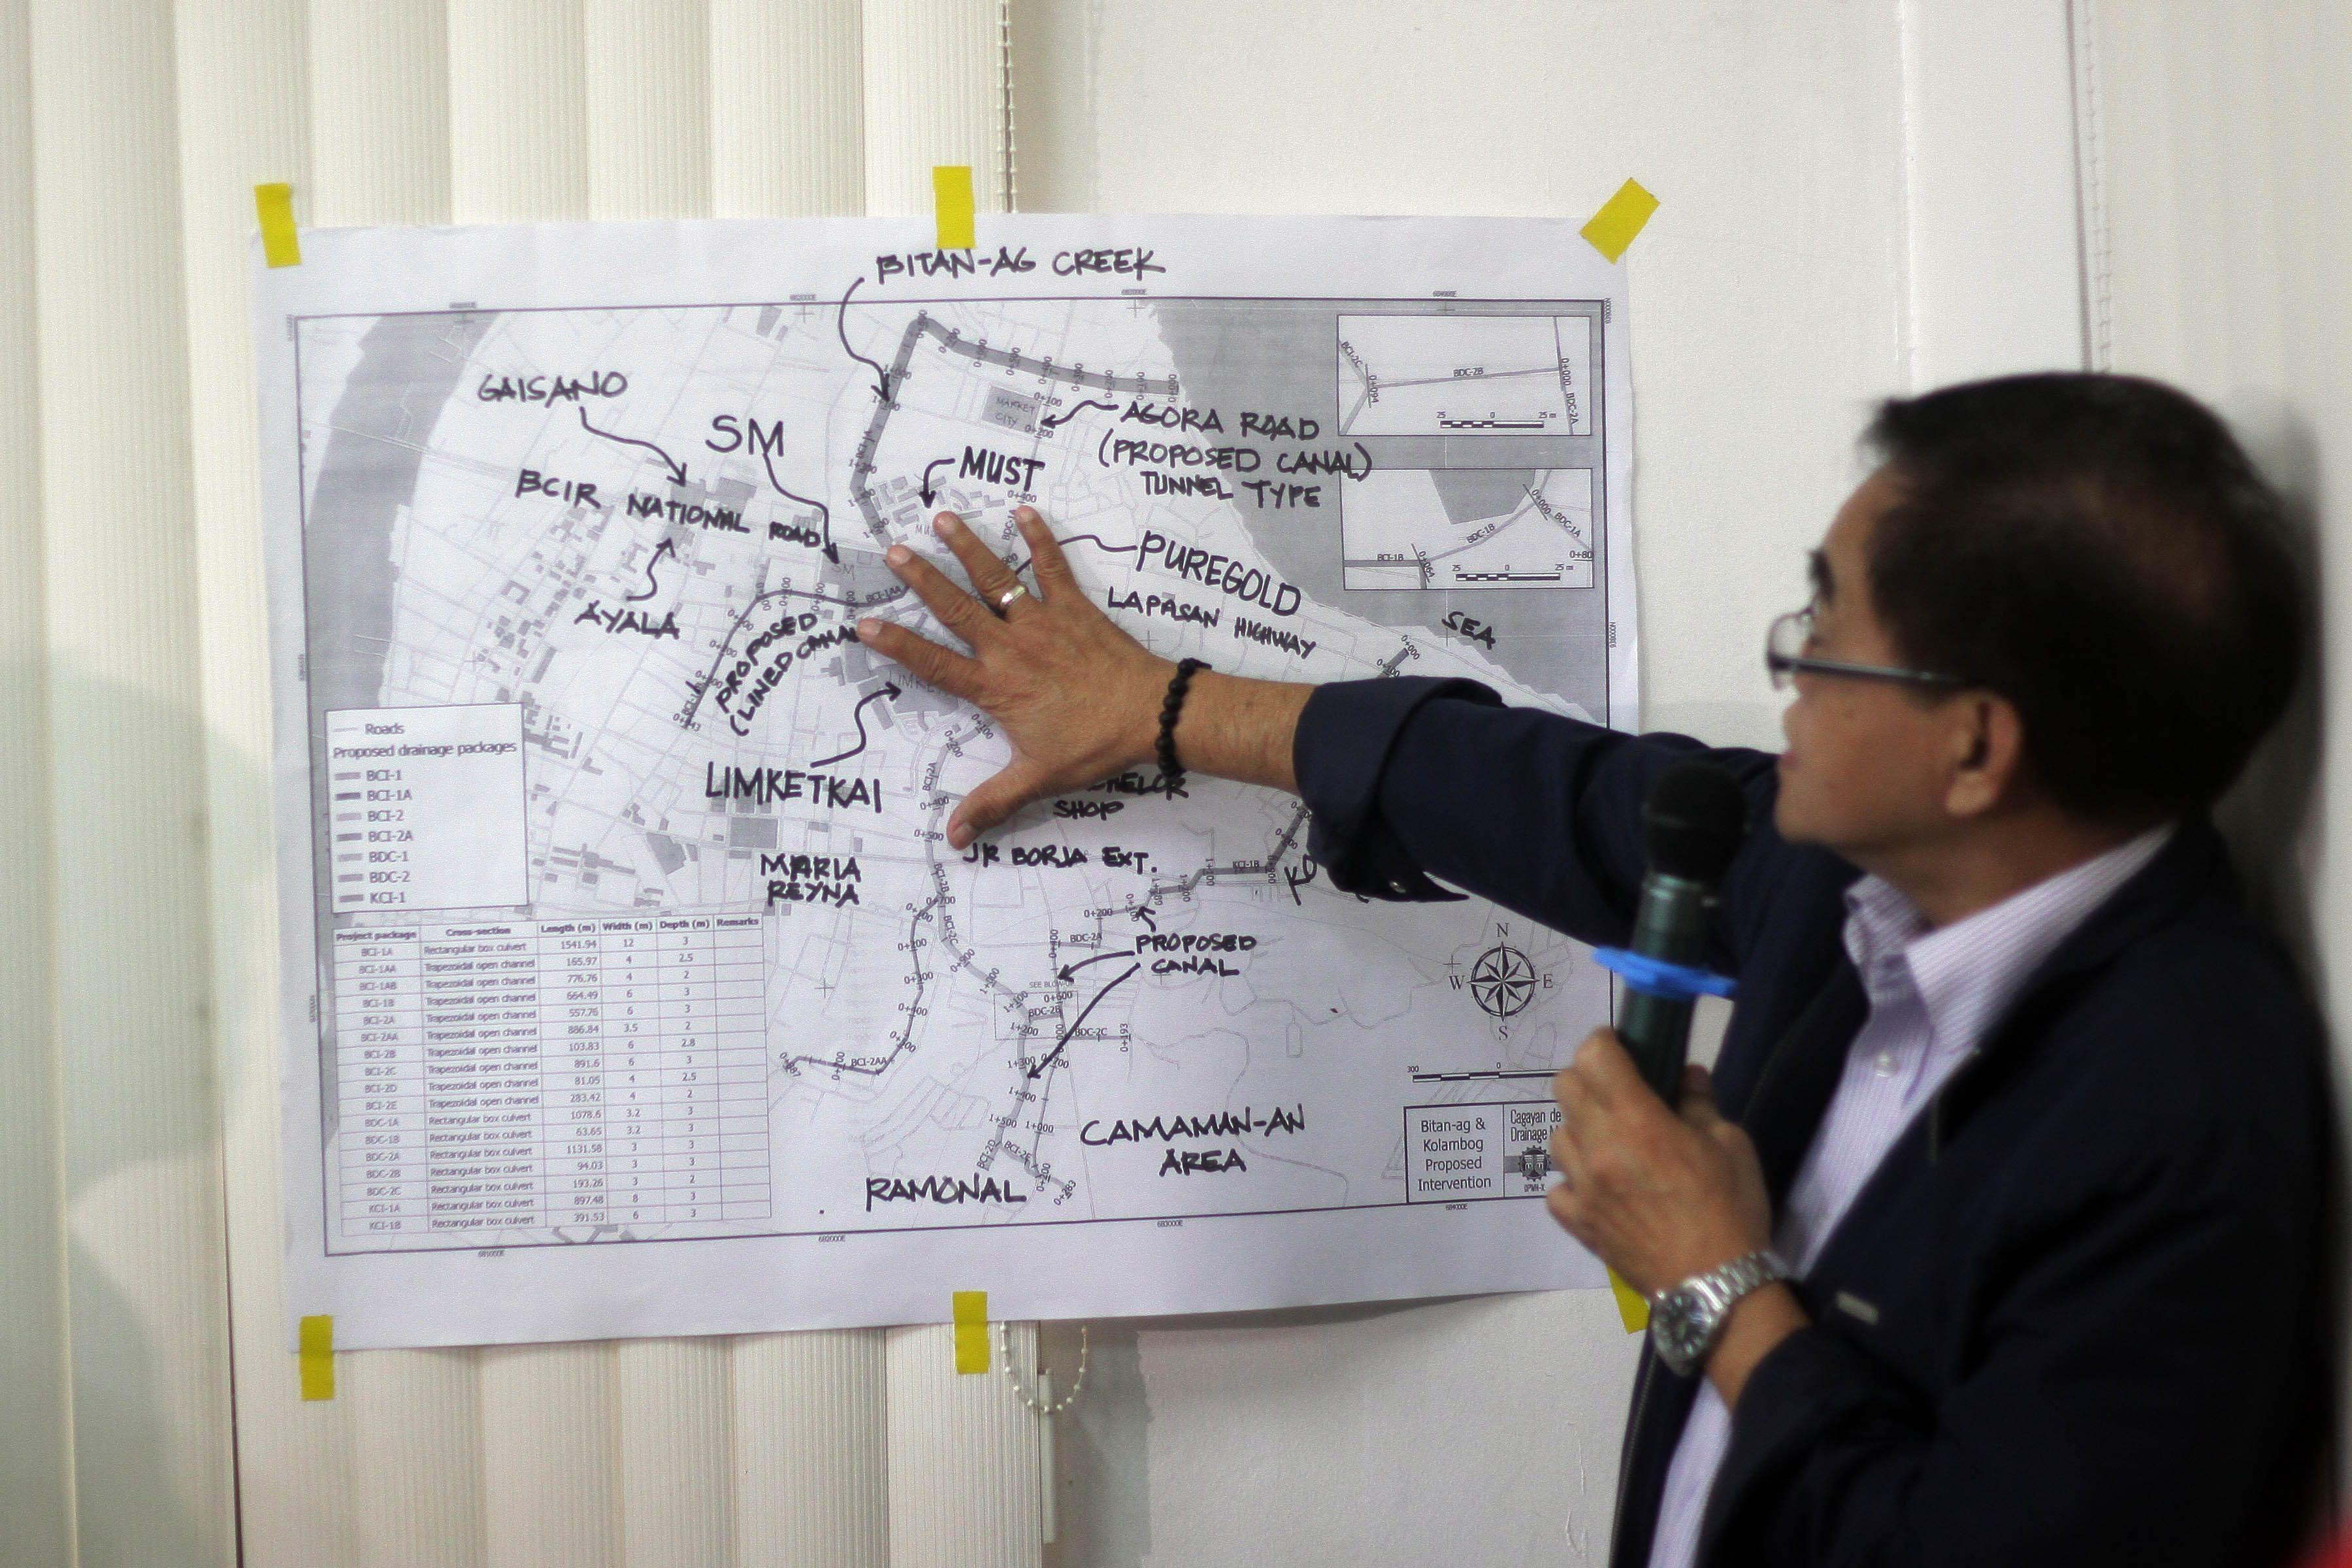 DRAINAGE MASTERPLAN. Cagayan de Oro City 2nd District Representative Maxino Rodriguez shows the map for the DPWH’s drainage masterplan for Bitan-ag Creek which would cost P1.2 billion. Photo by Bobby Lagsa/Rappler 